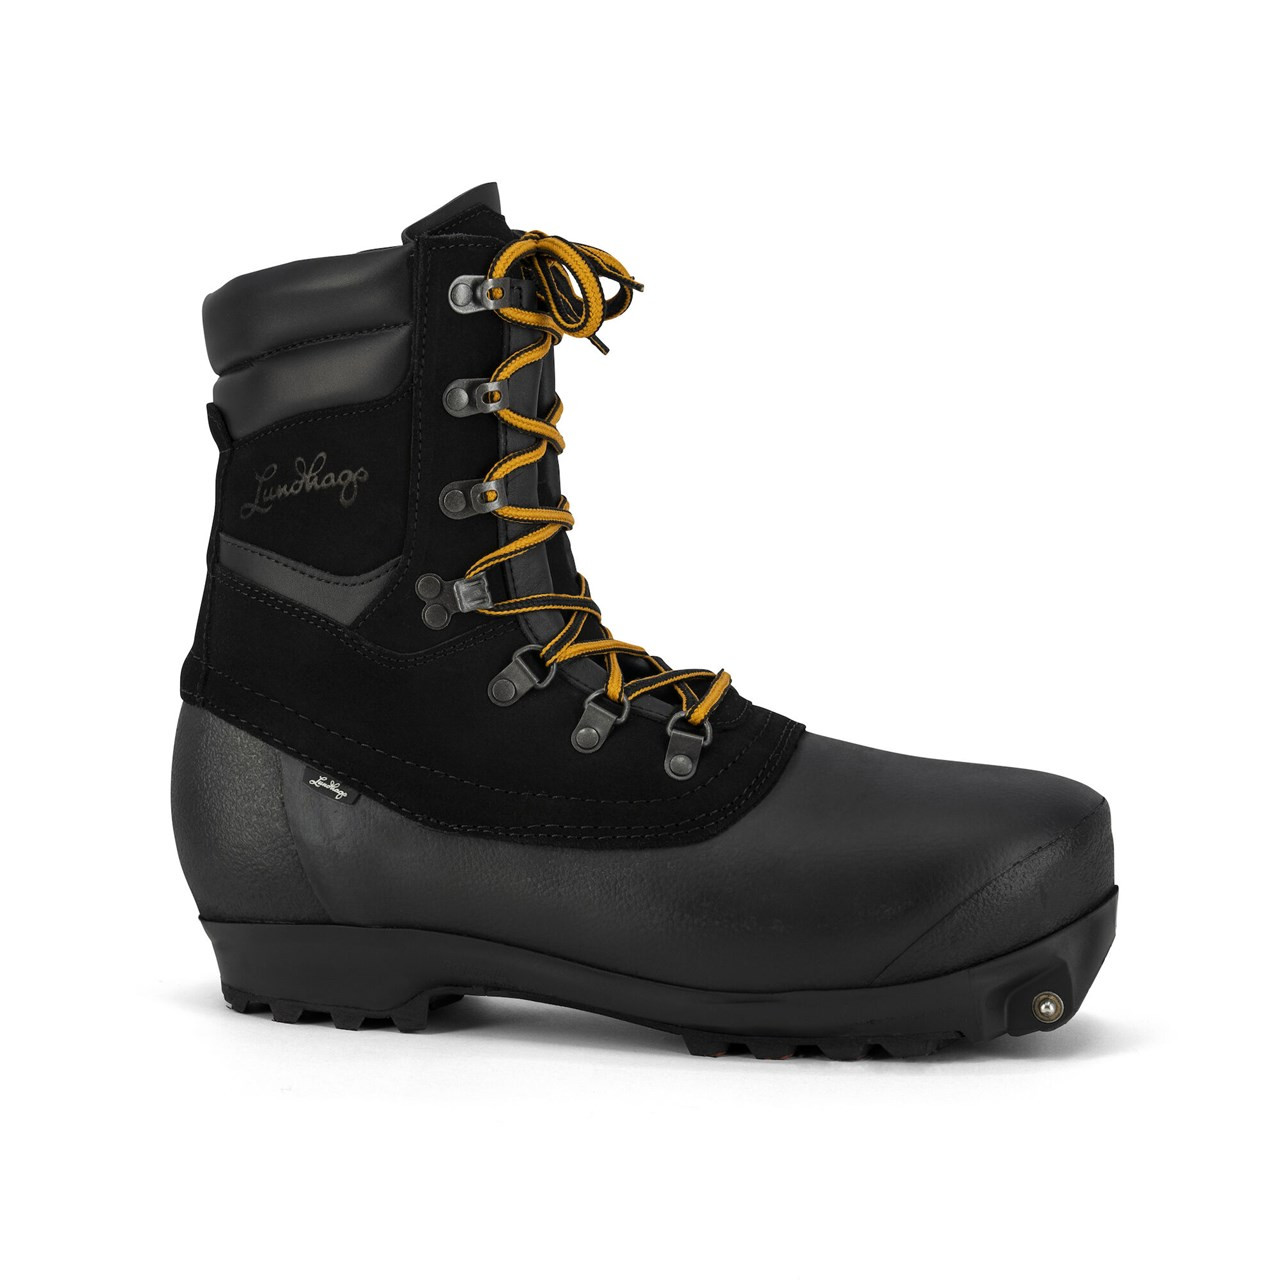 Lundhags Abisku Expedition Xplore Ski Boot